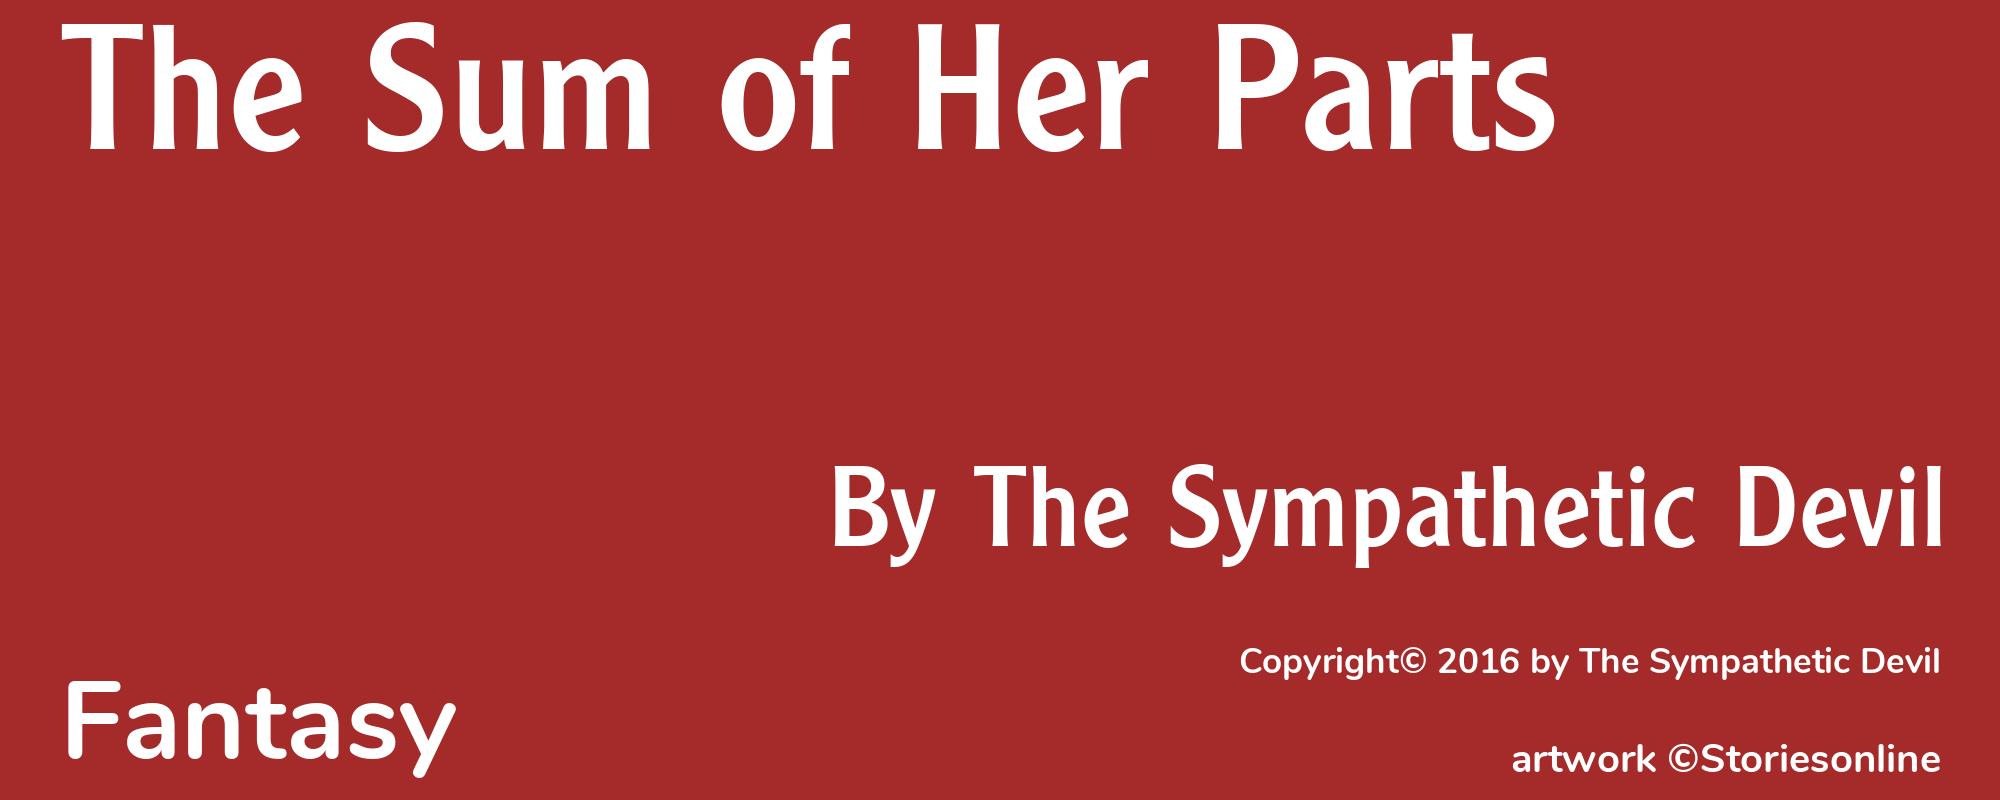 The Sum of Her Parts - Cover